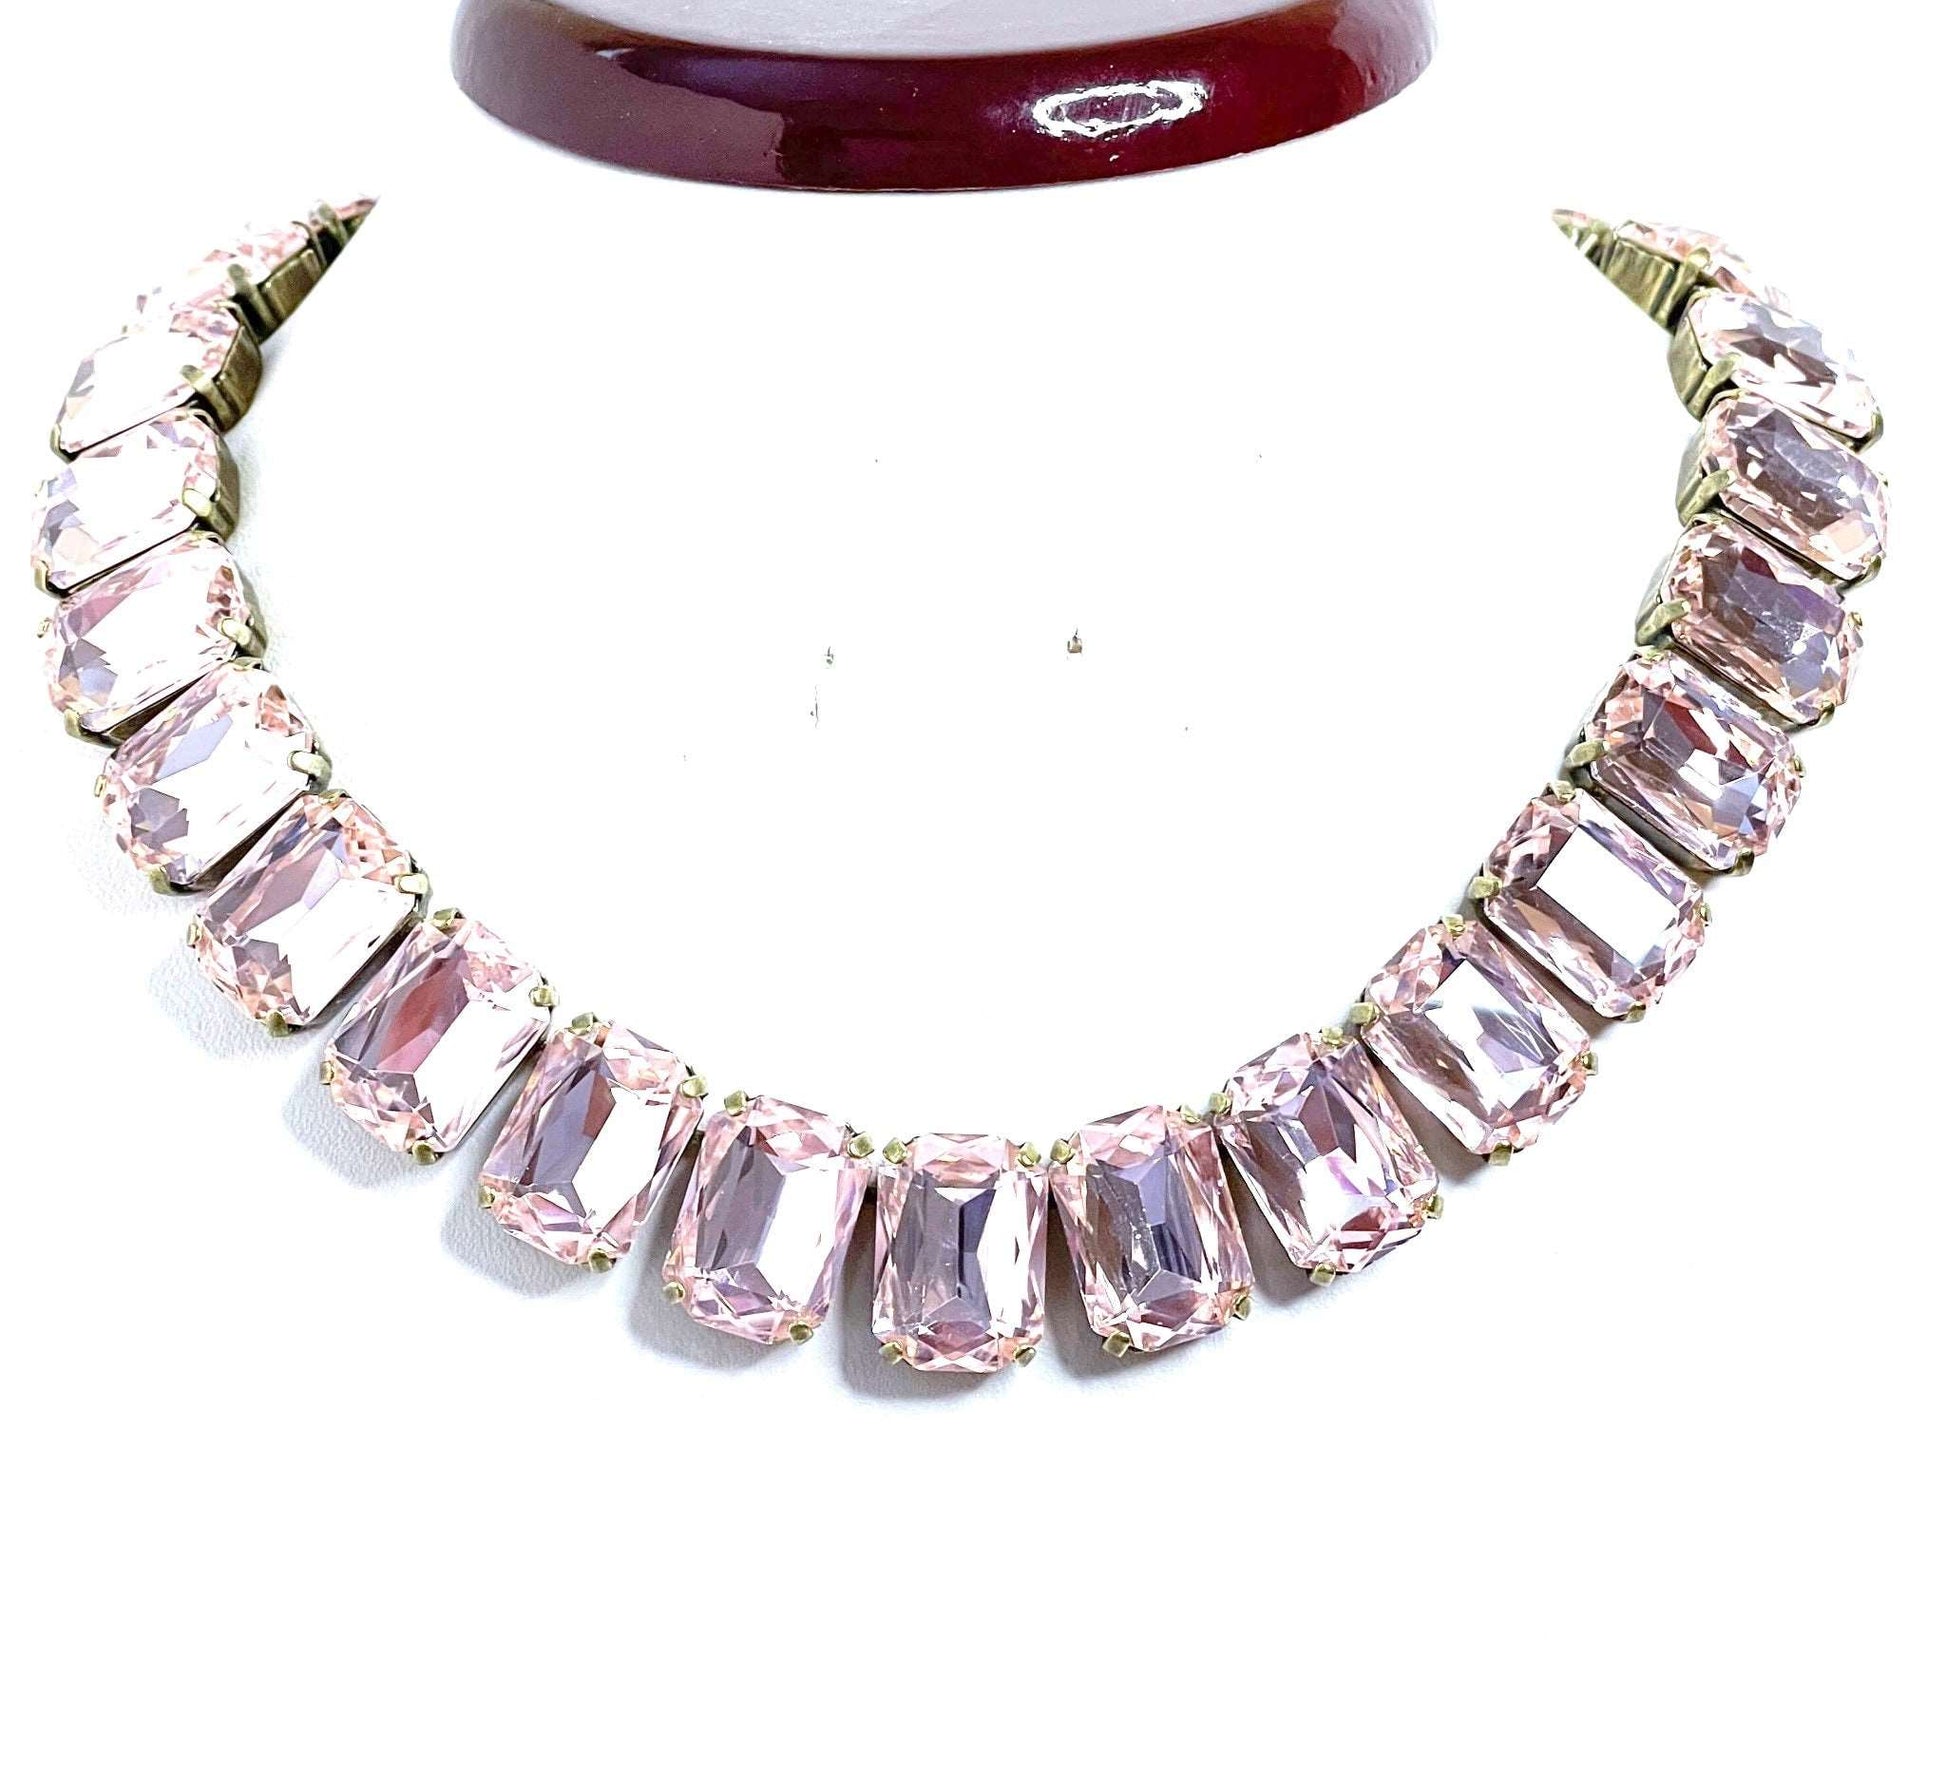 Light Rose Georgian Collet Necklace, Crystal Choker, Anna Wintour Style, Pink Riviere Necklace, Statement Necklace for Women